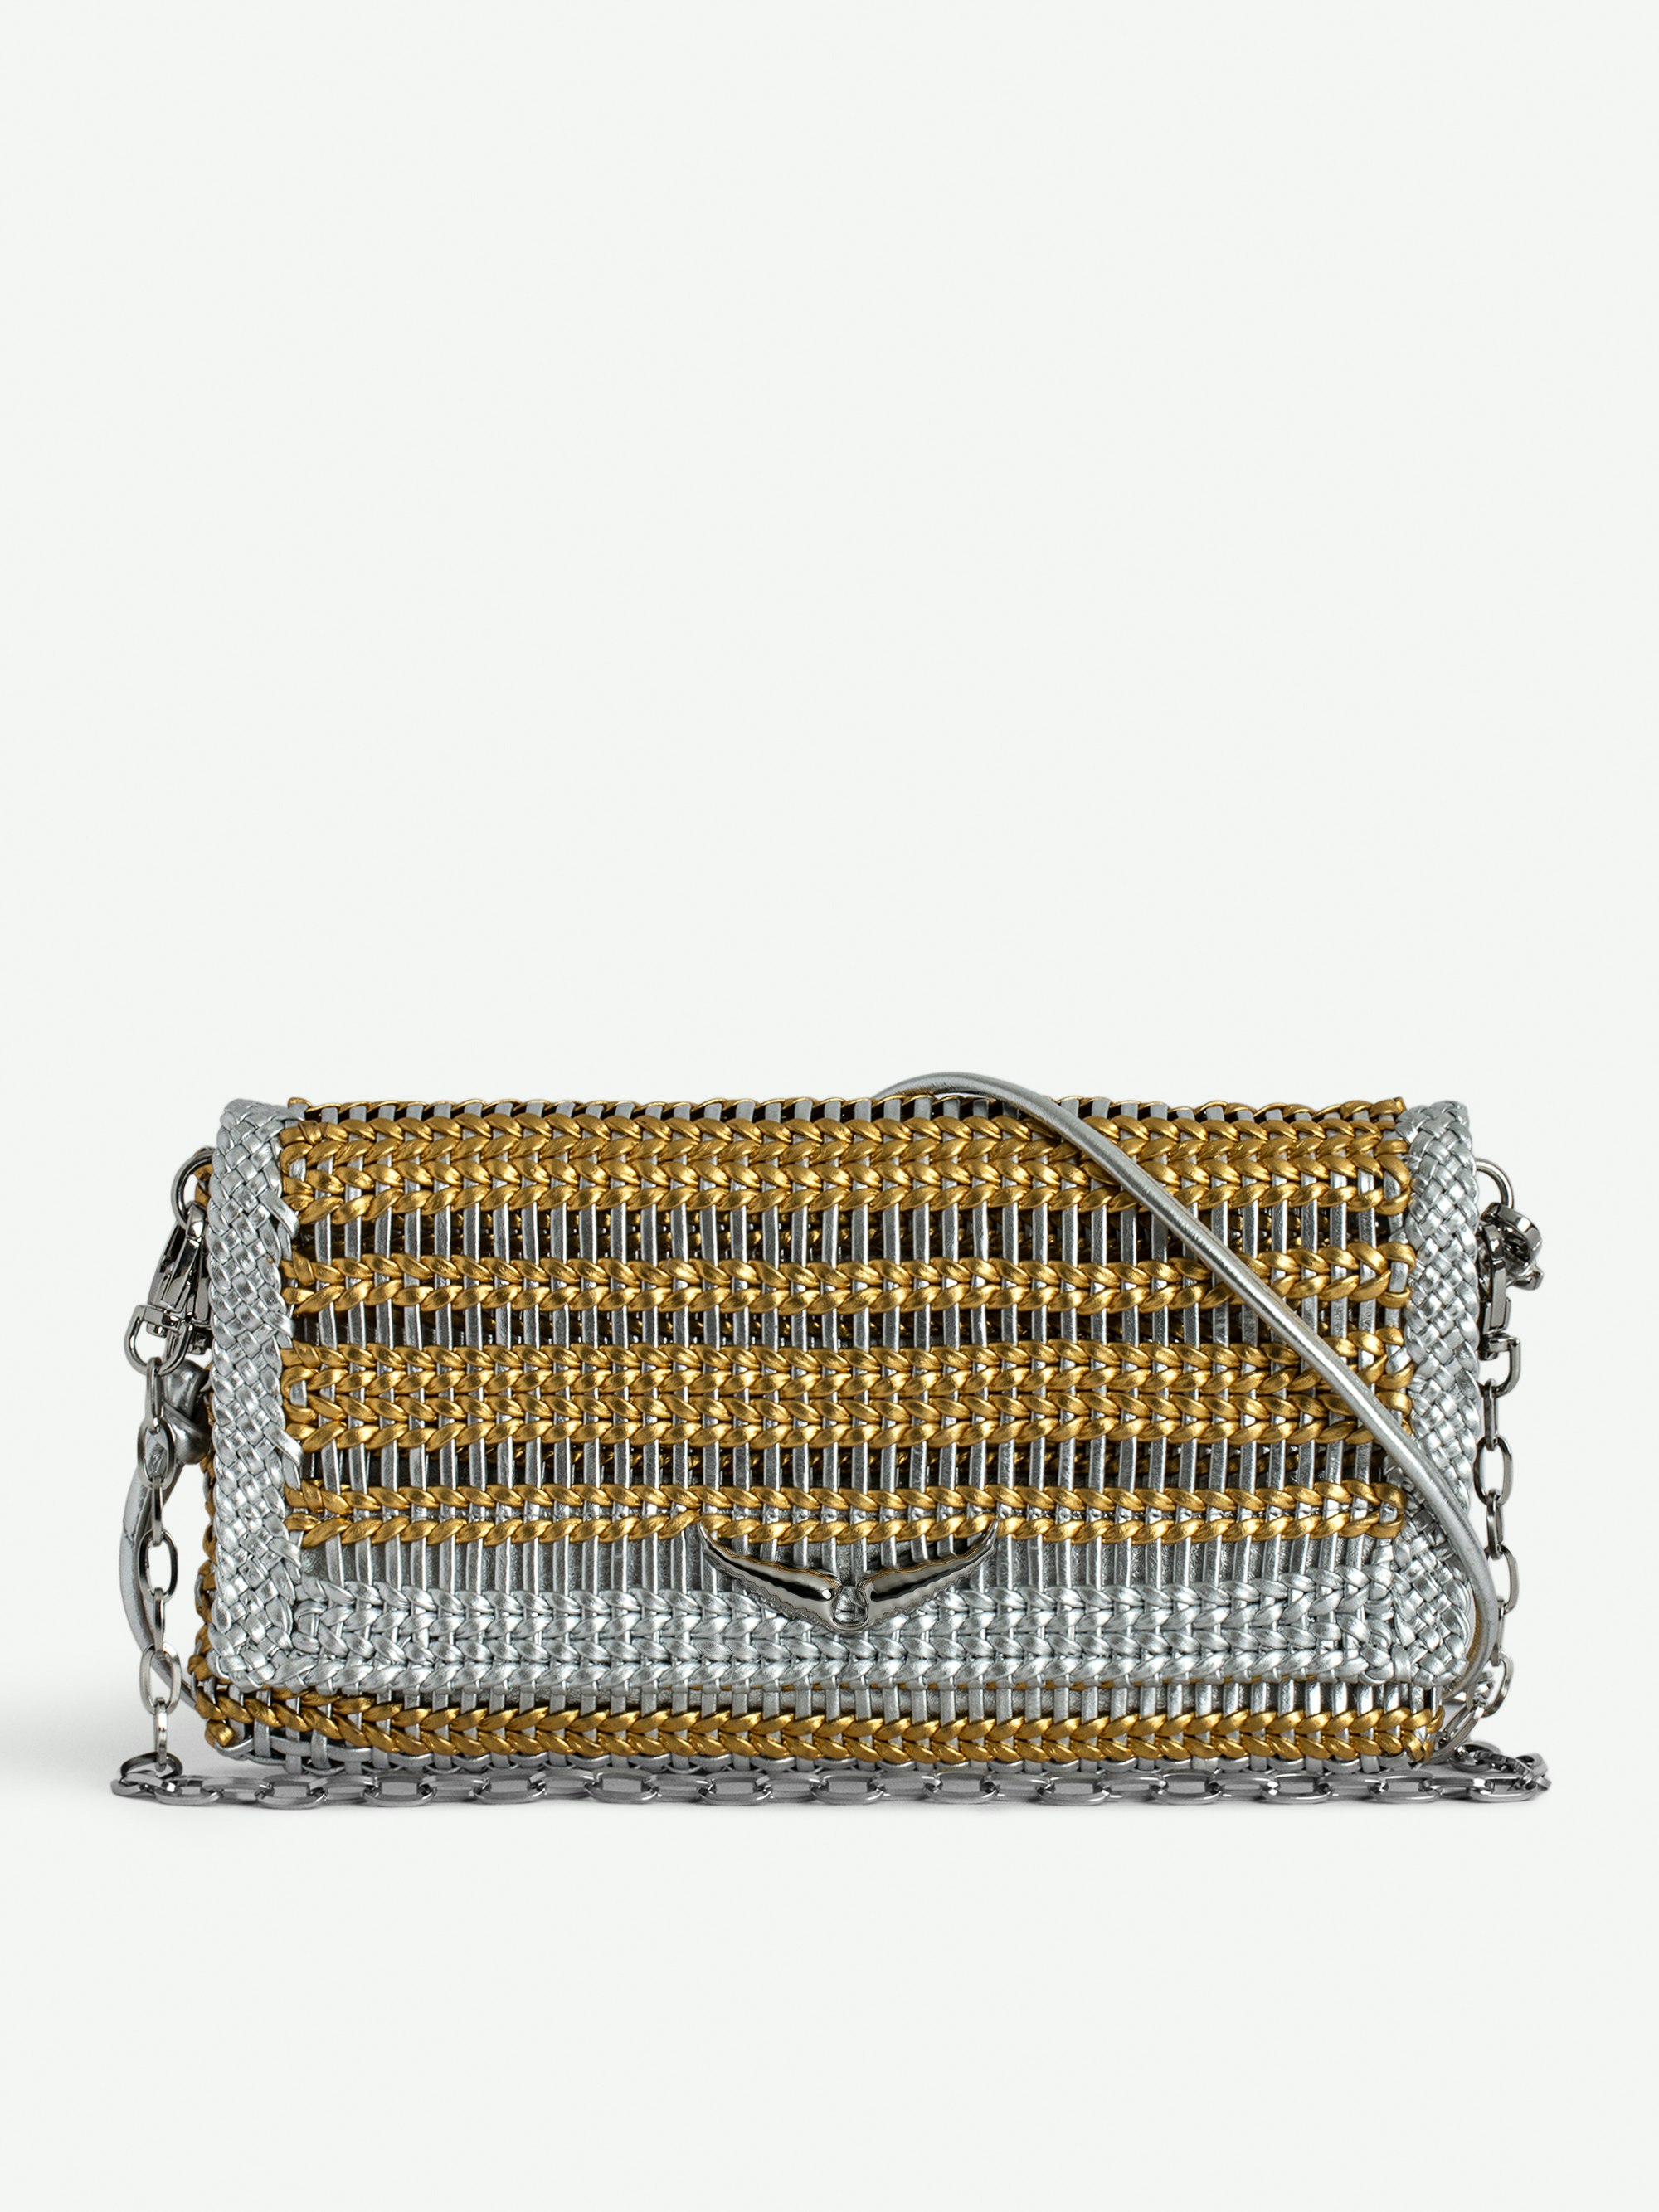 Rock Eternal Metallic Bag - Women’s silver braided smooth metallic leather clutch with tied shoulder strap, chain and wings.